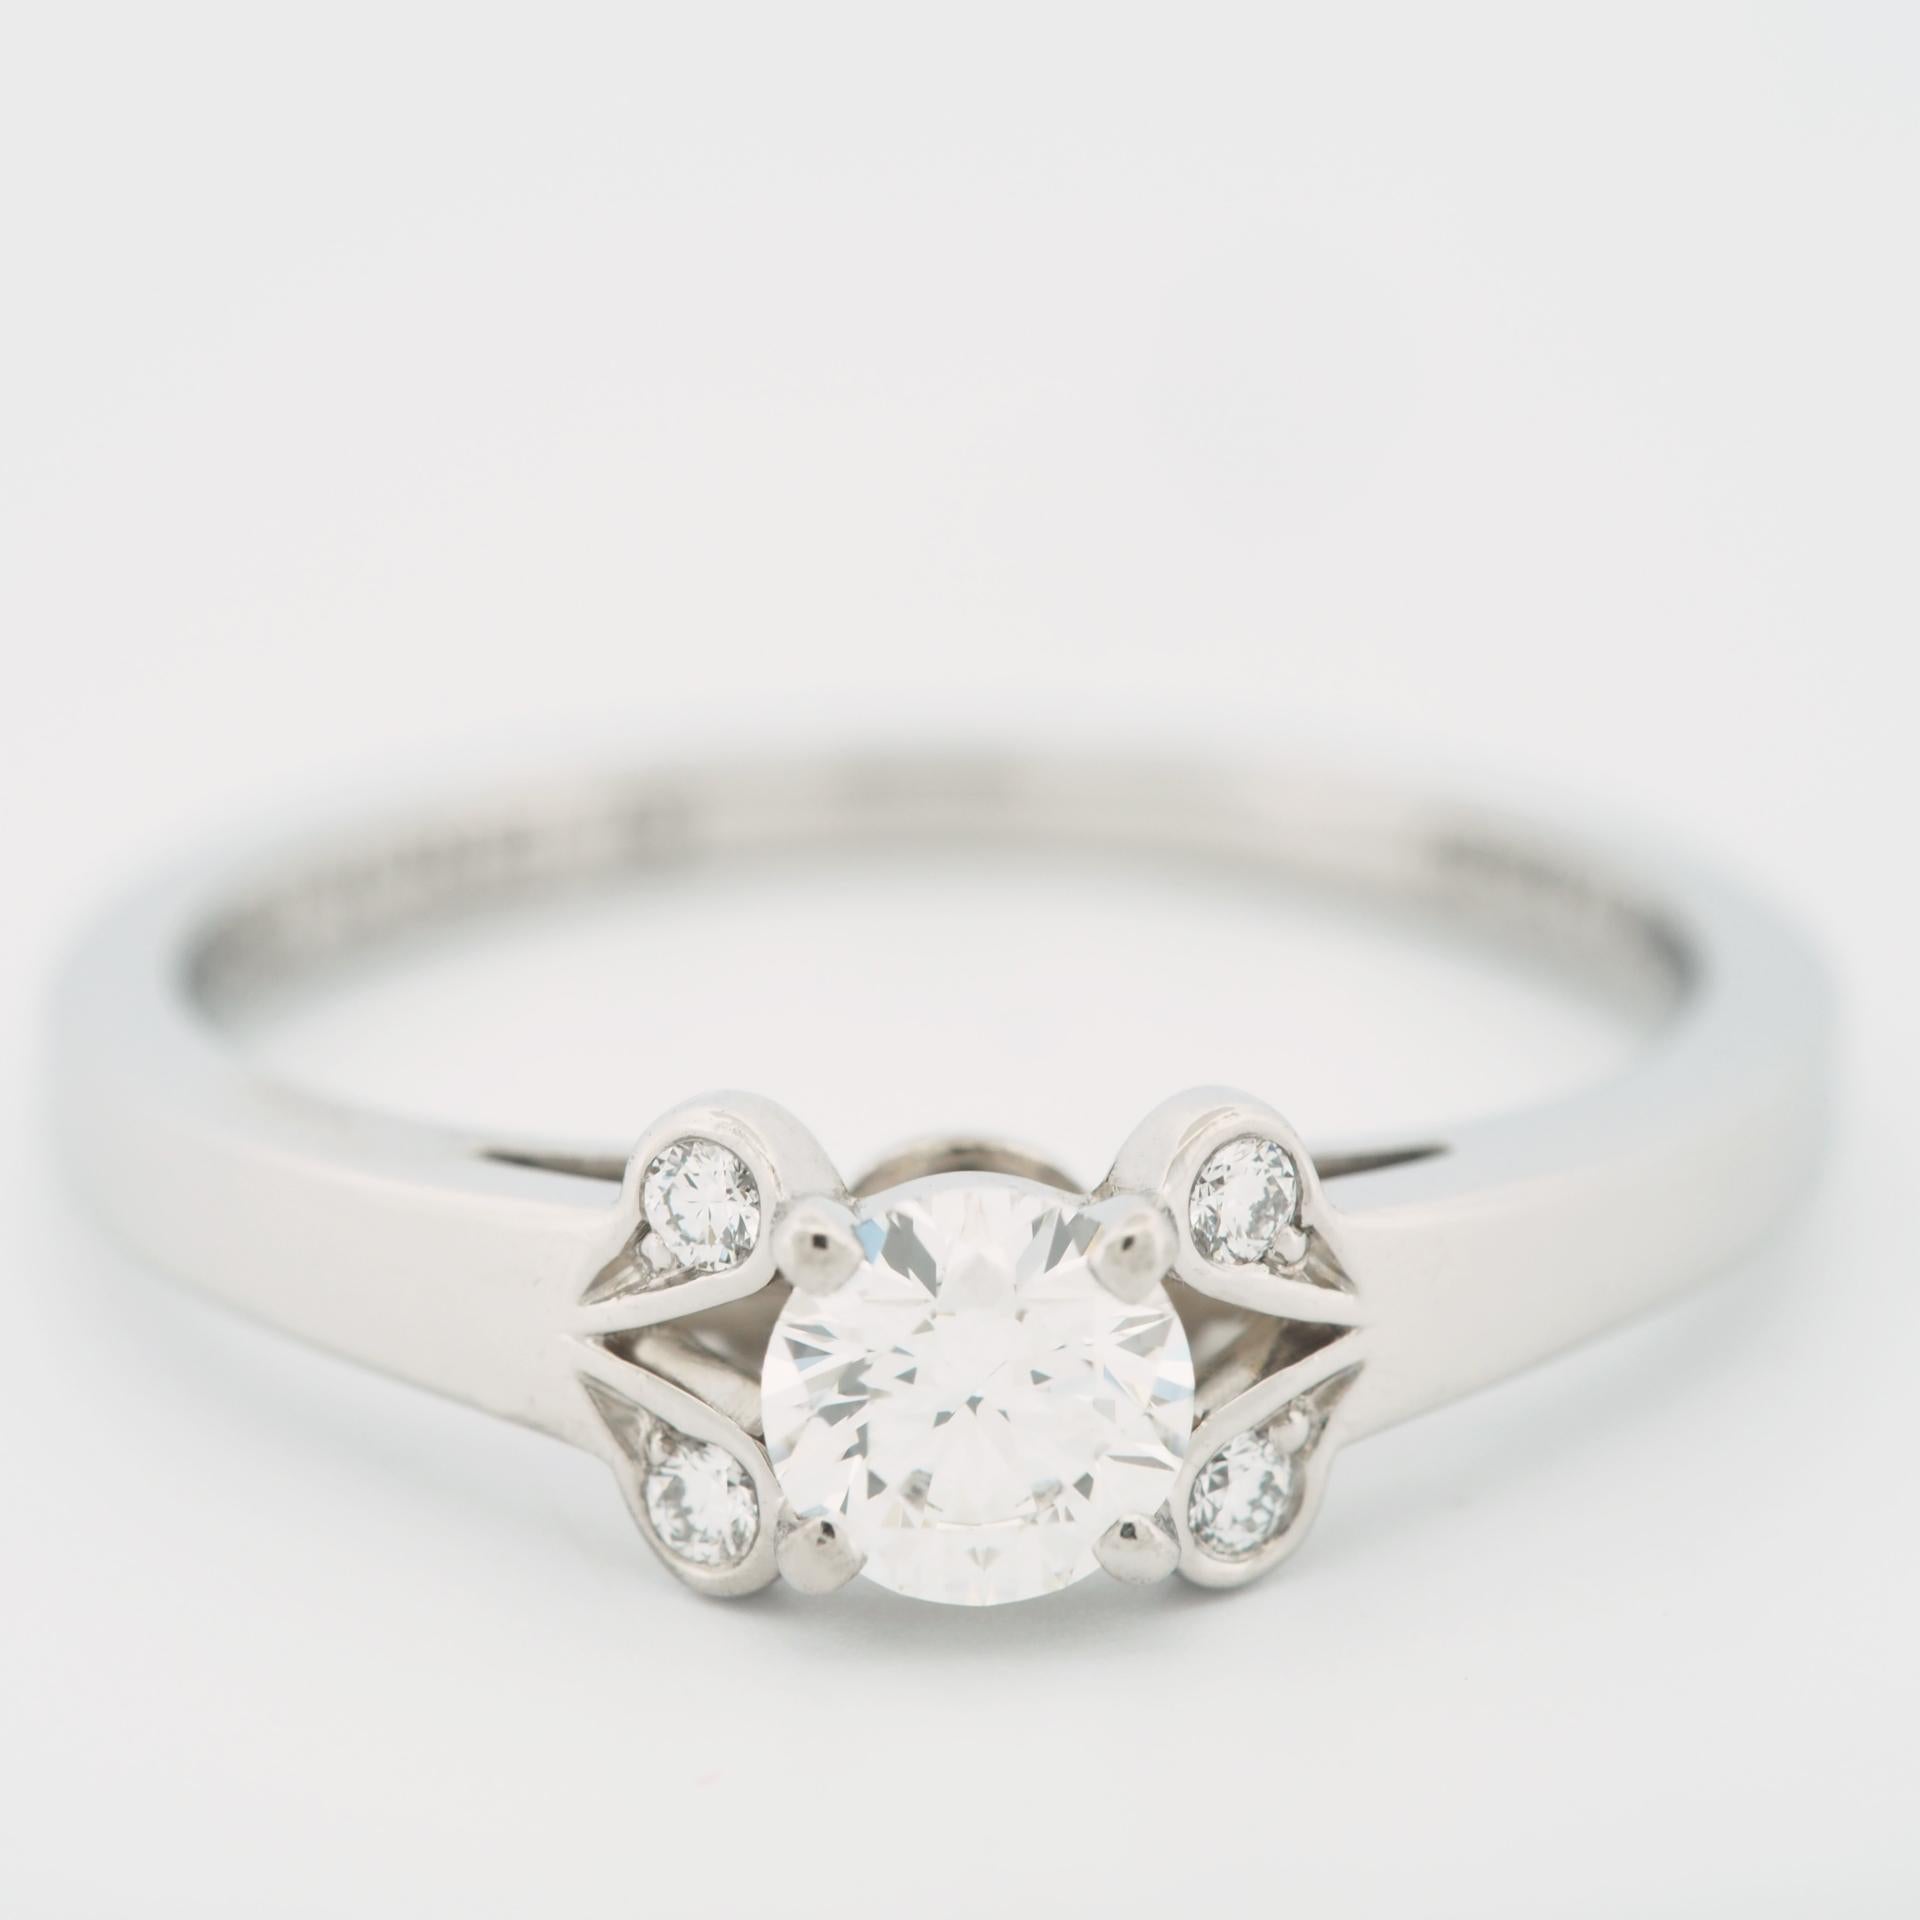 Cartier Ballerine Solitaire 0.32ct Diamond Engagement Ring Pt 51 In Good Condition For Sale In Kobe, Hyogo